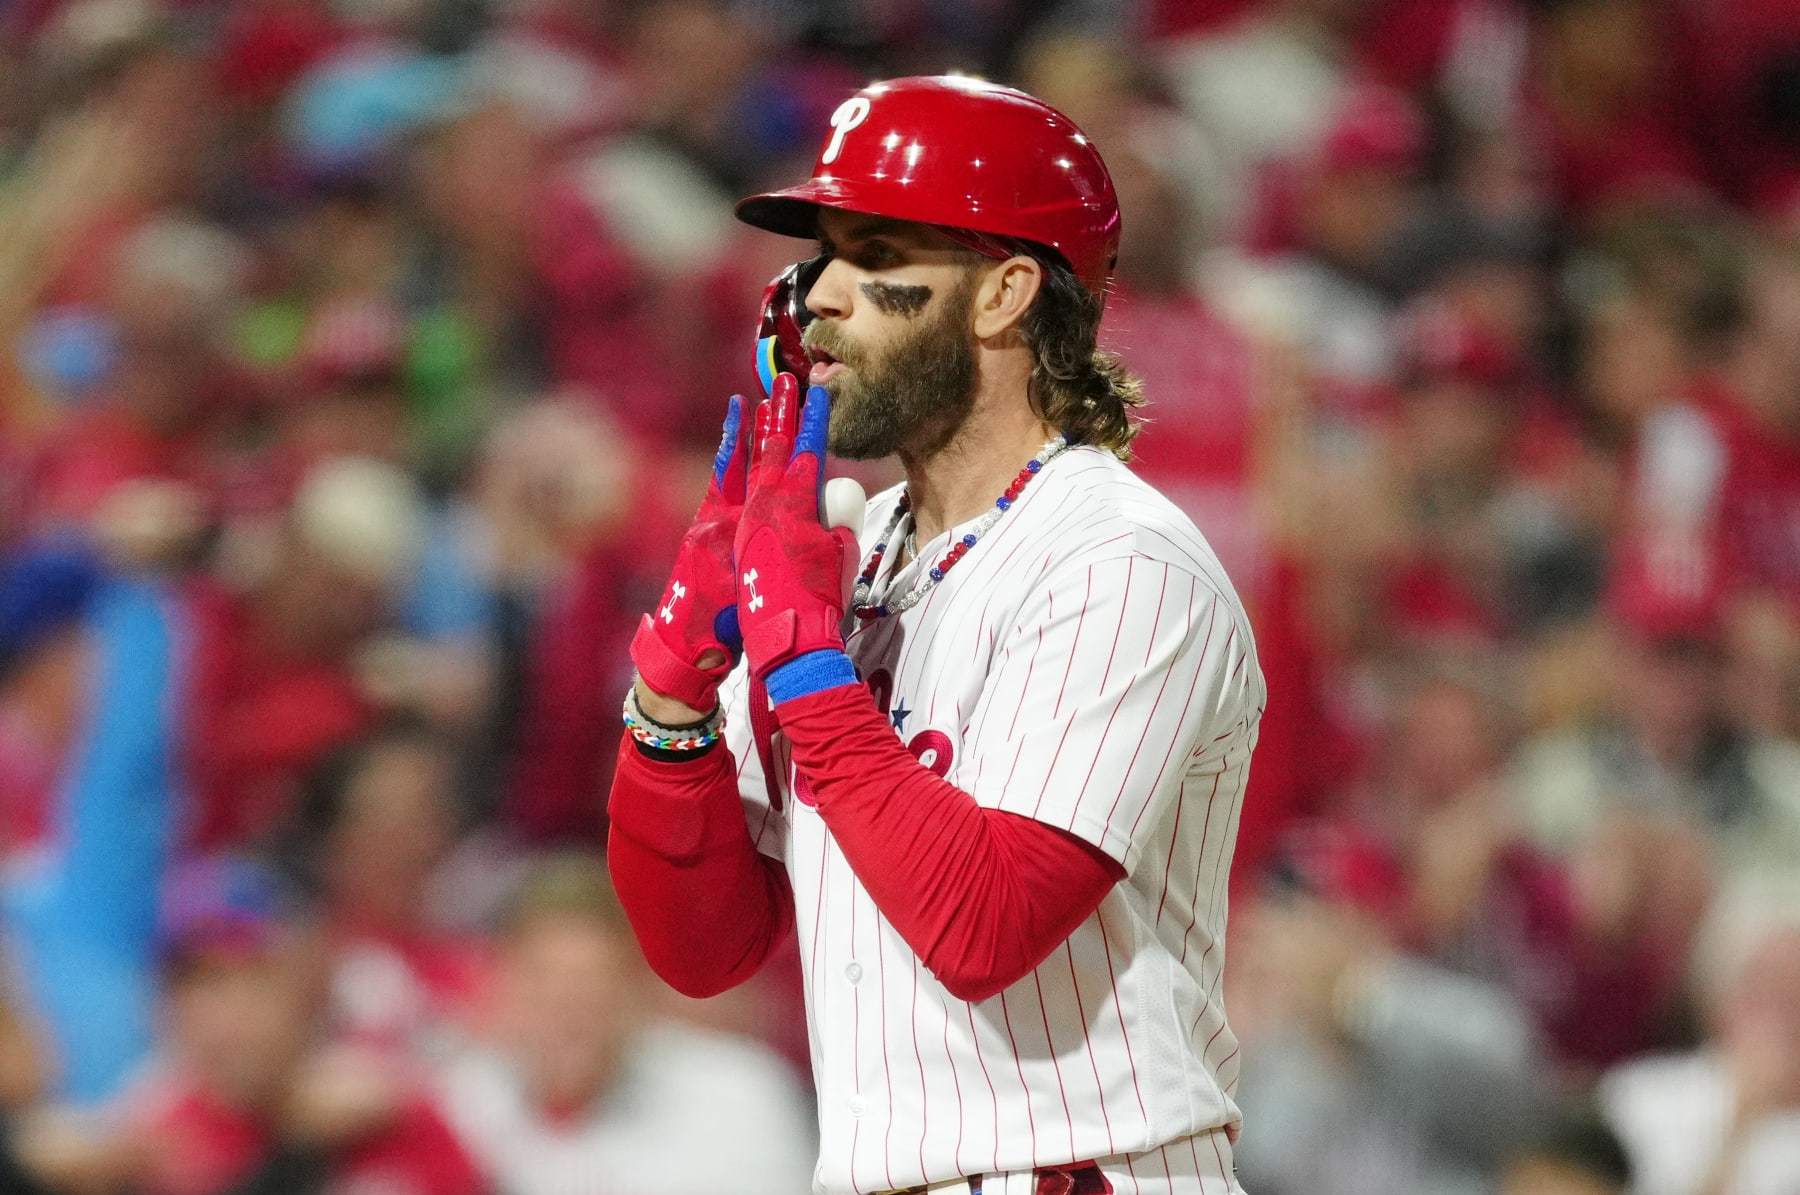 Phillies' Bryce Harper Signs His Helmet for a Young Fan After Being Ejected